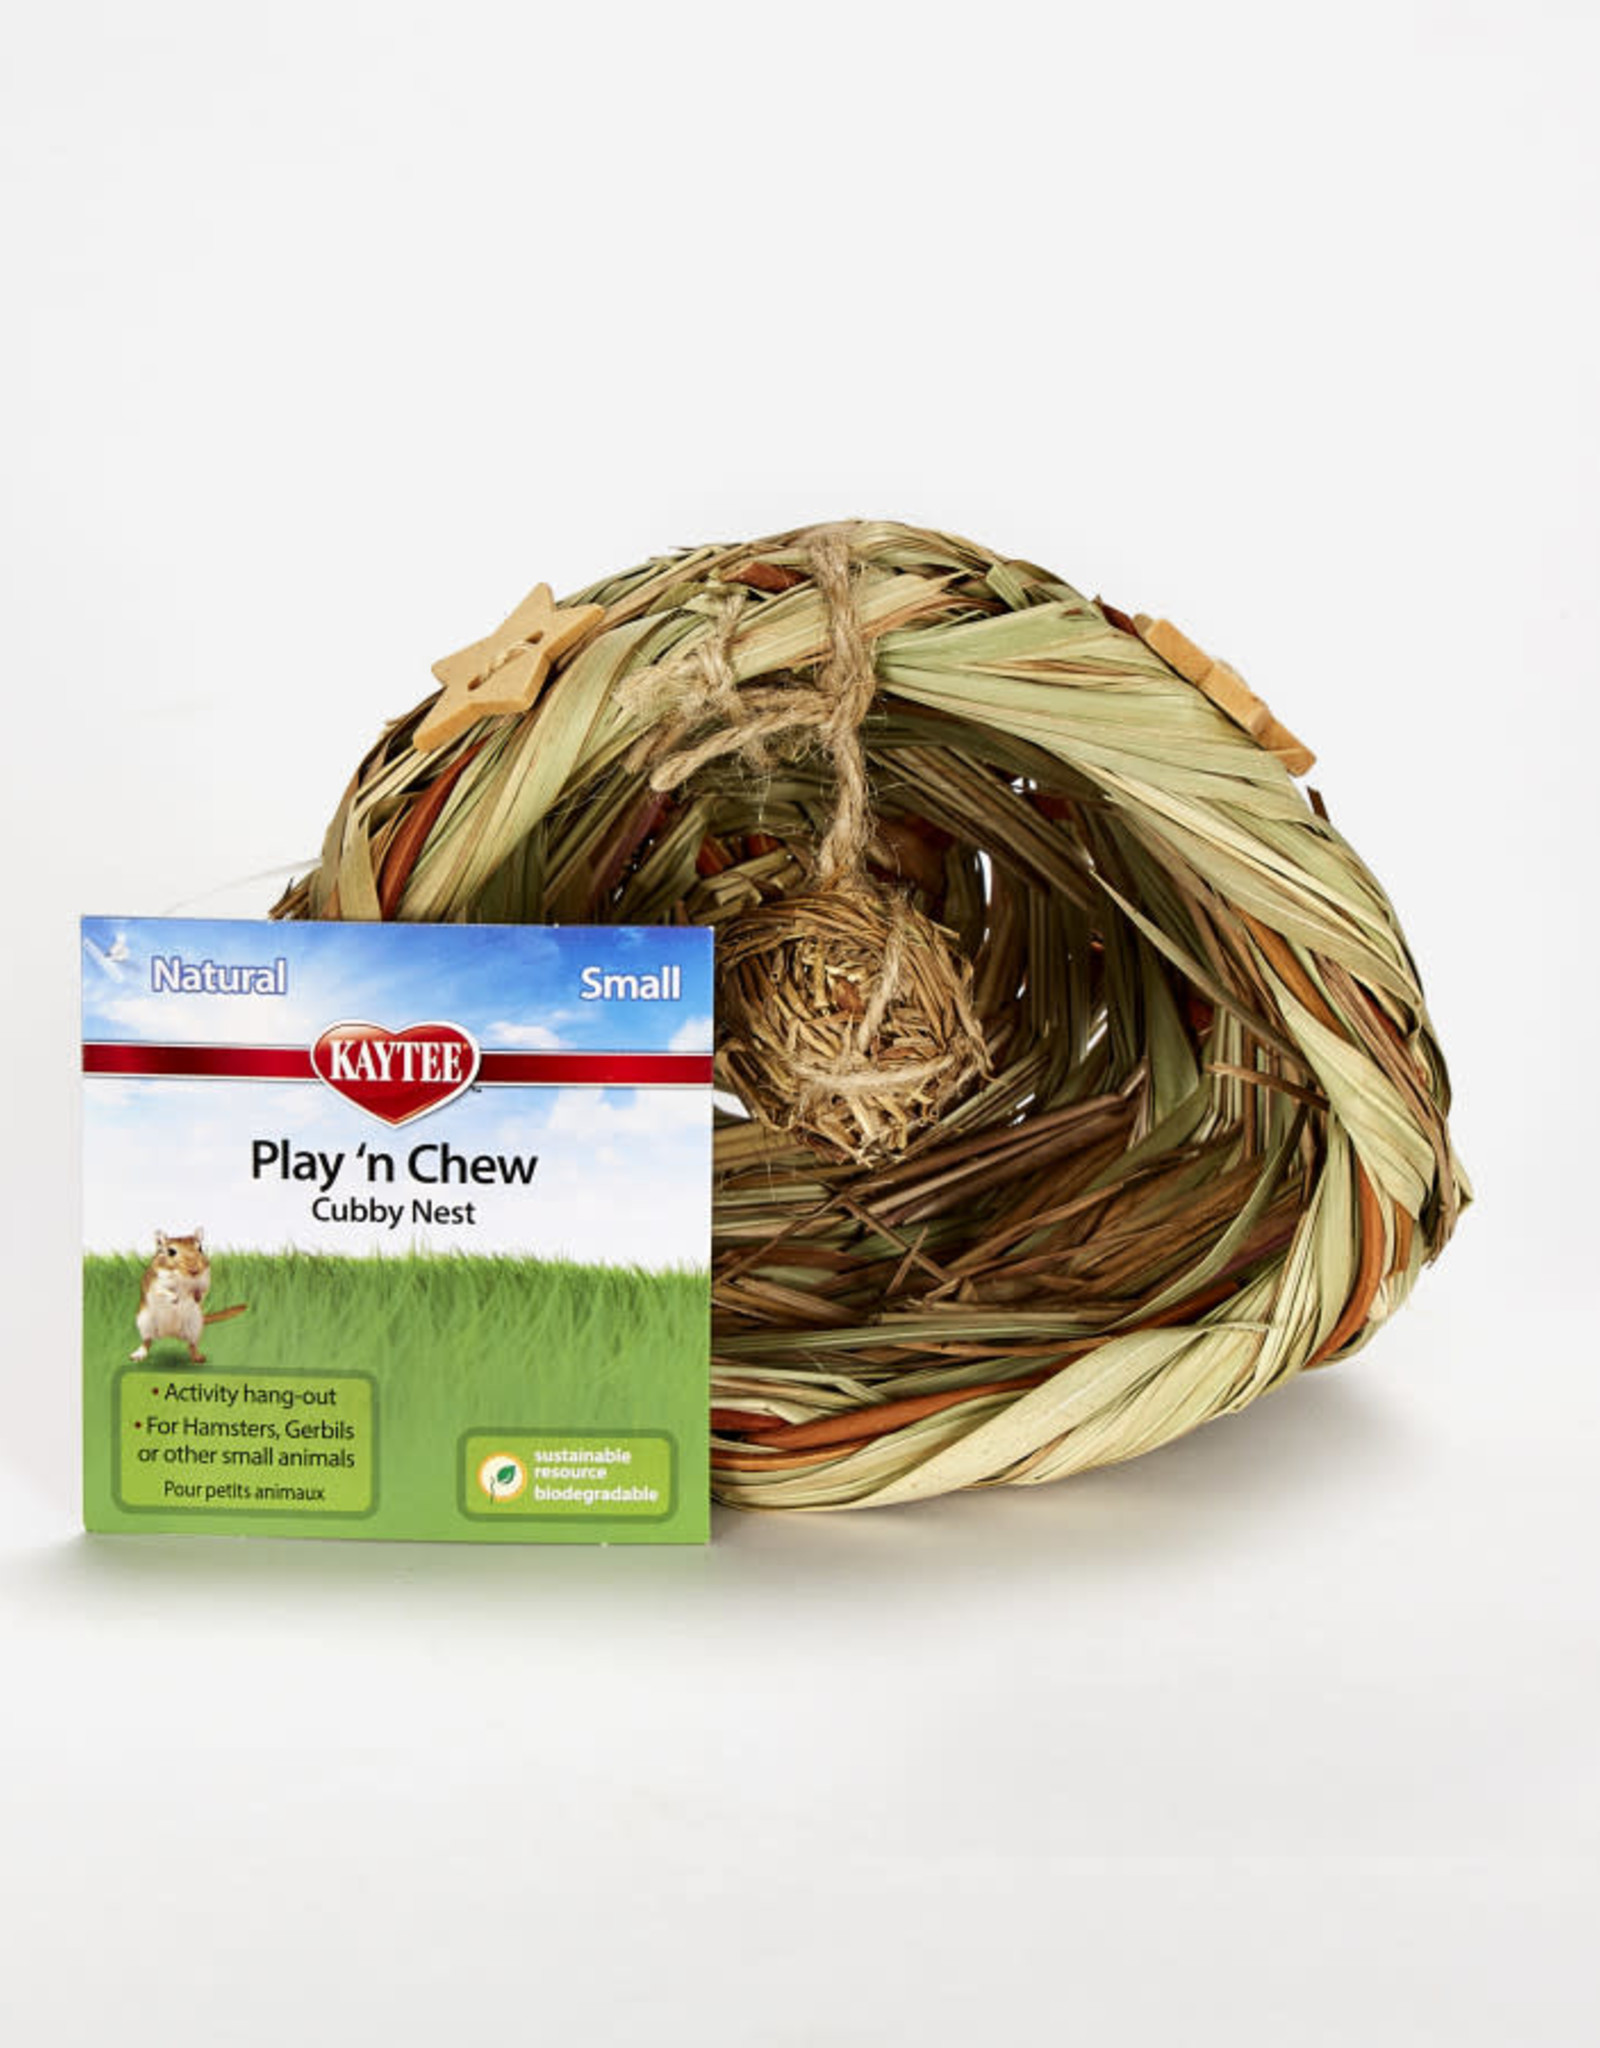 CENTRAL - KAYTEE PRODUCTS KAYTEE- NATURAL- 6X5X4- PLAY'N CHEW CUBBY NEST- SMALL